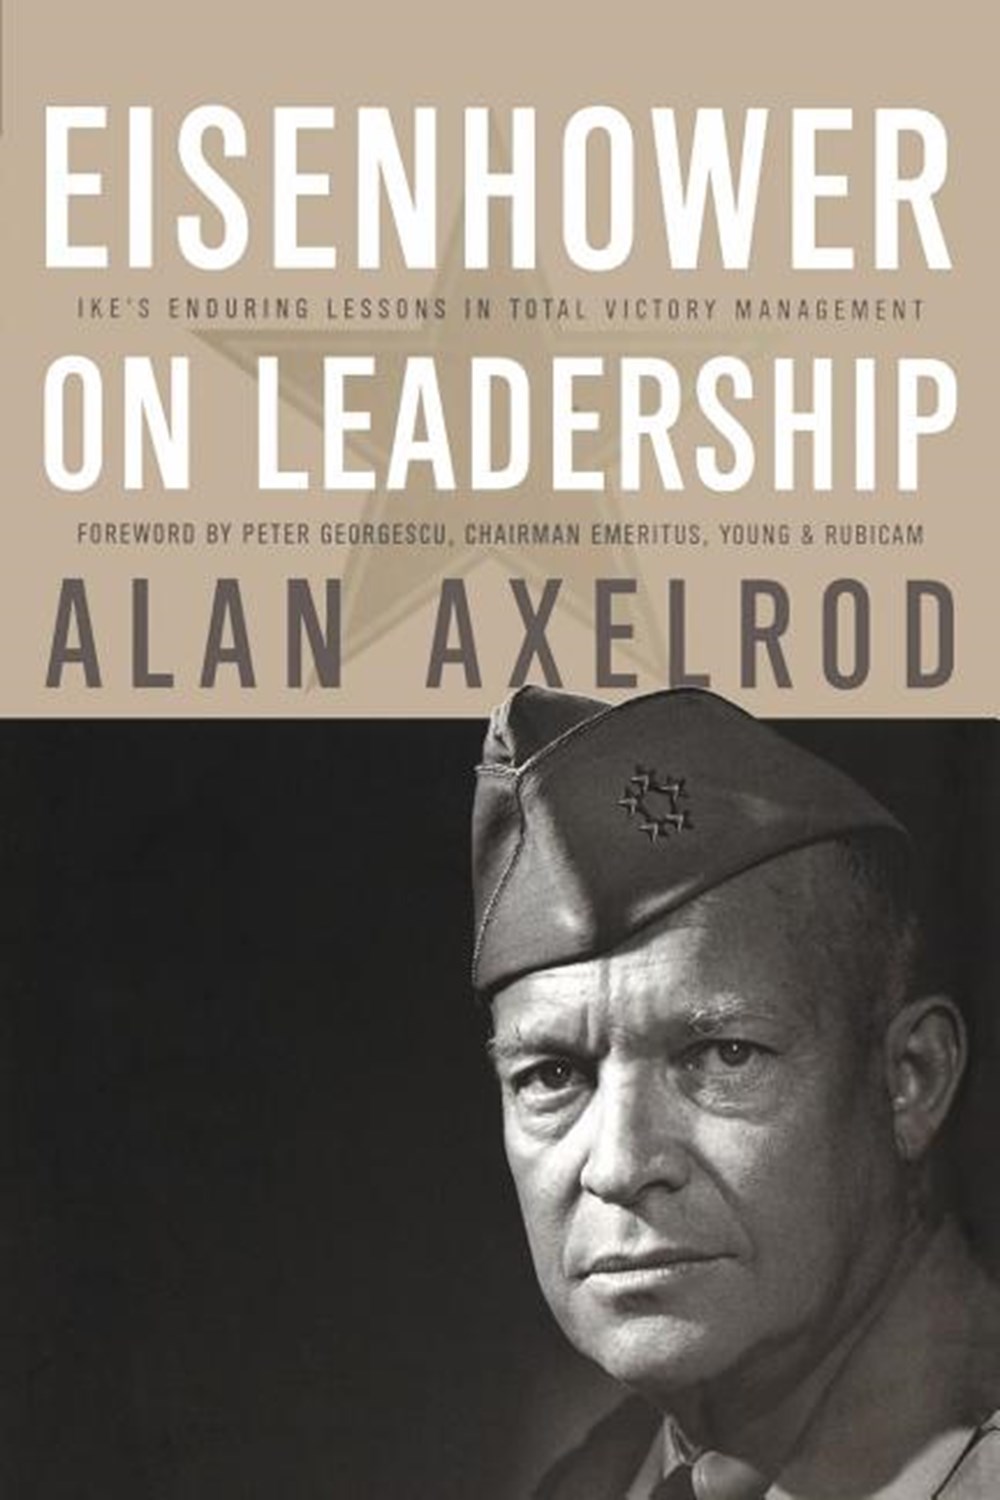 Eisenhower on Leadership: Ike's Enduring Lessons in Total Victory Management